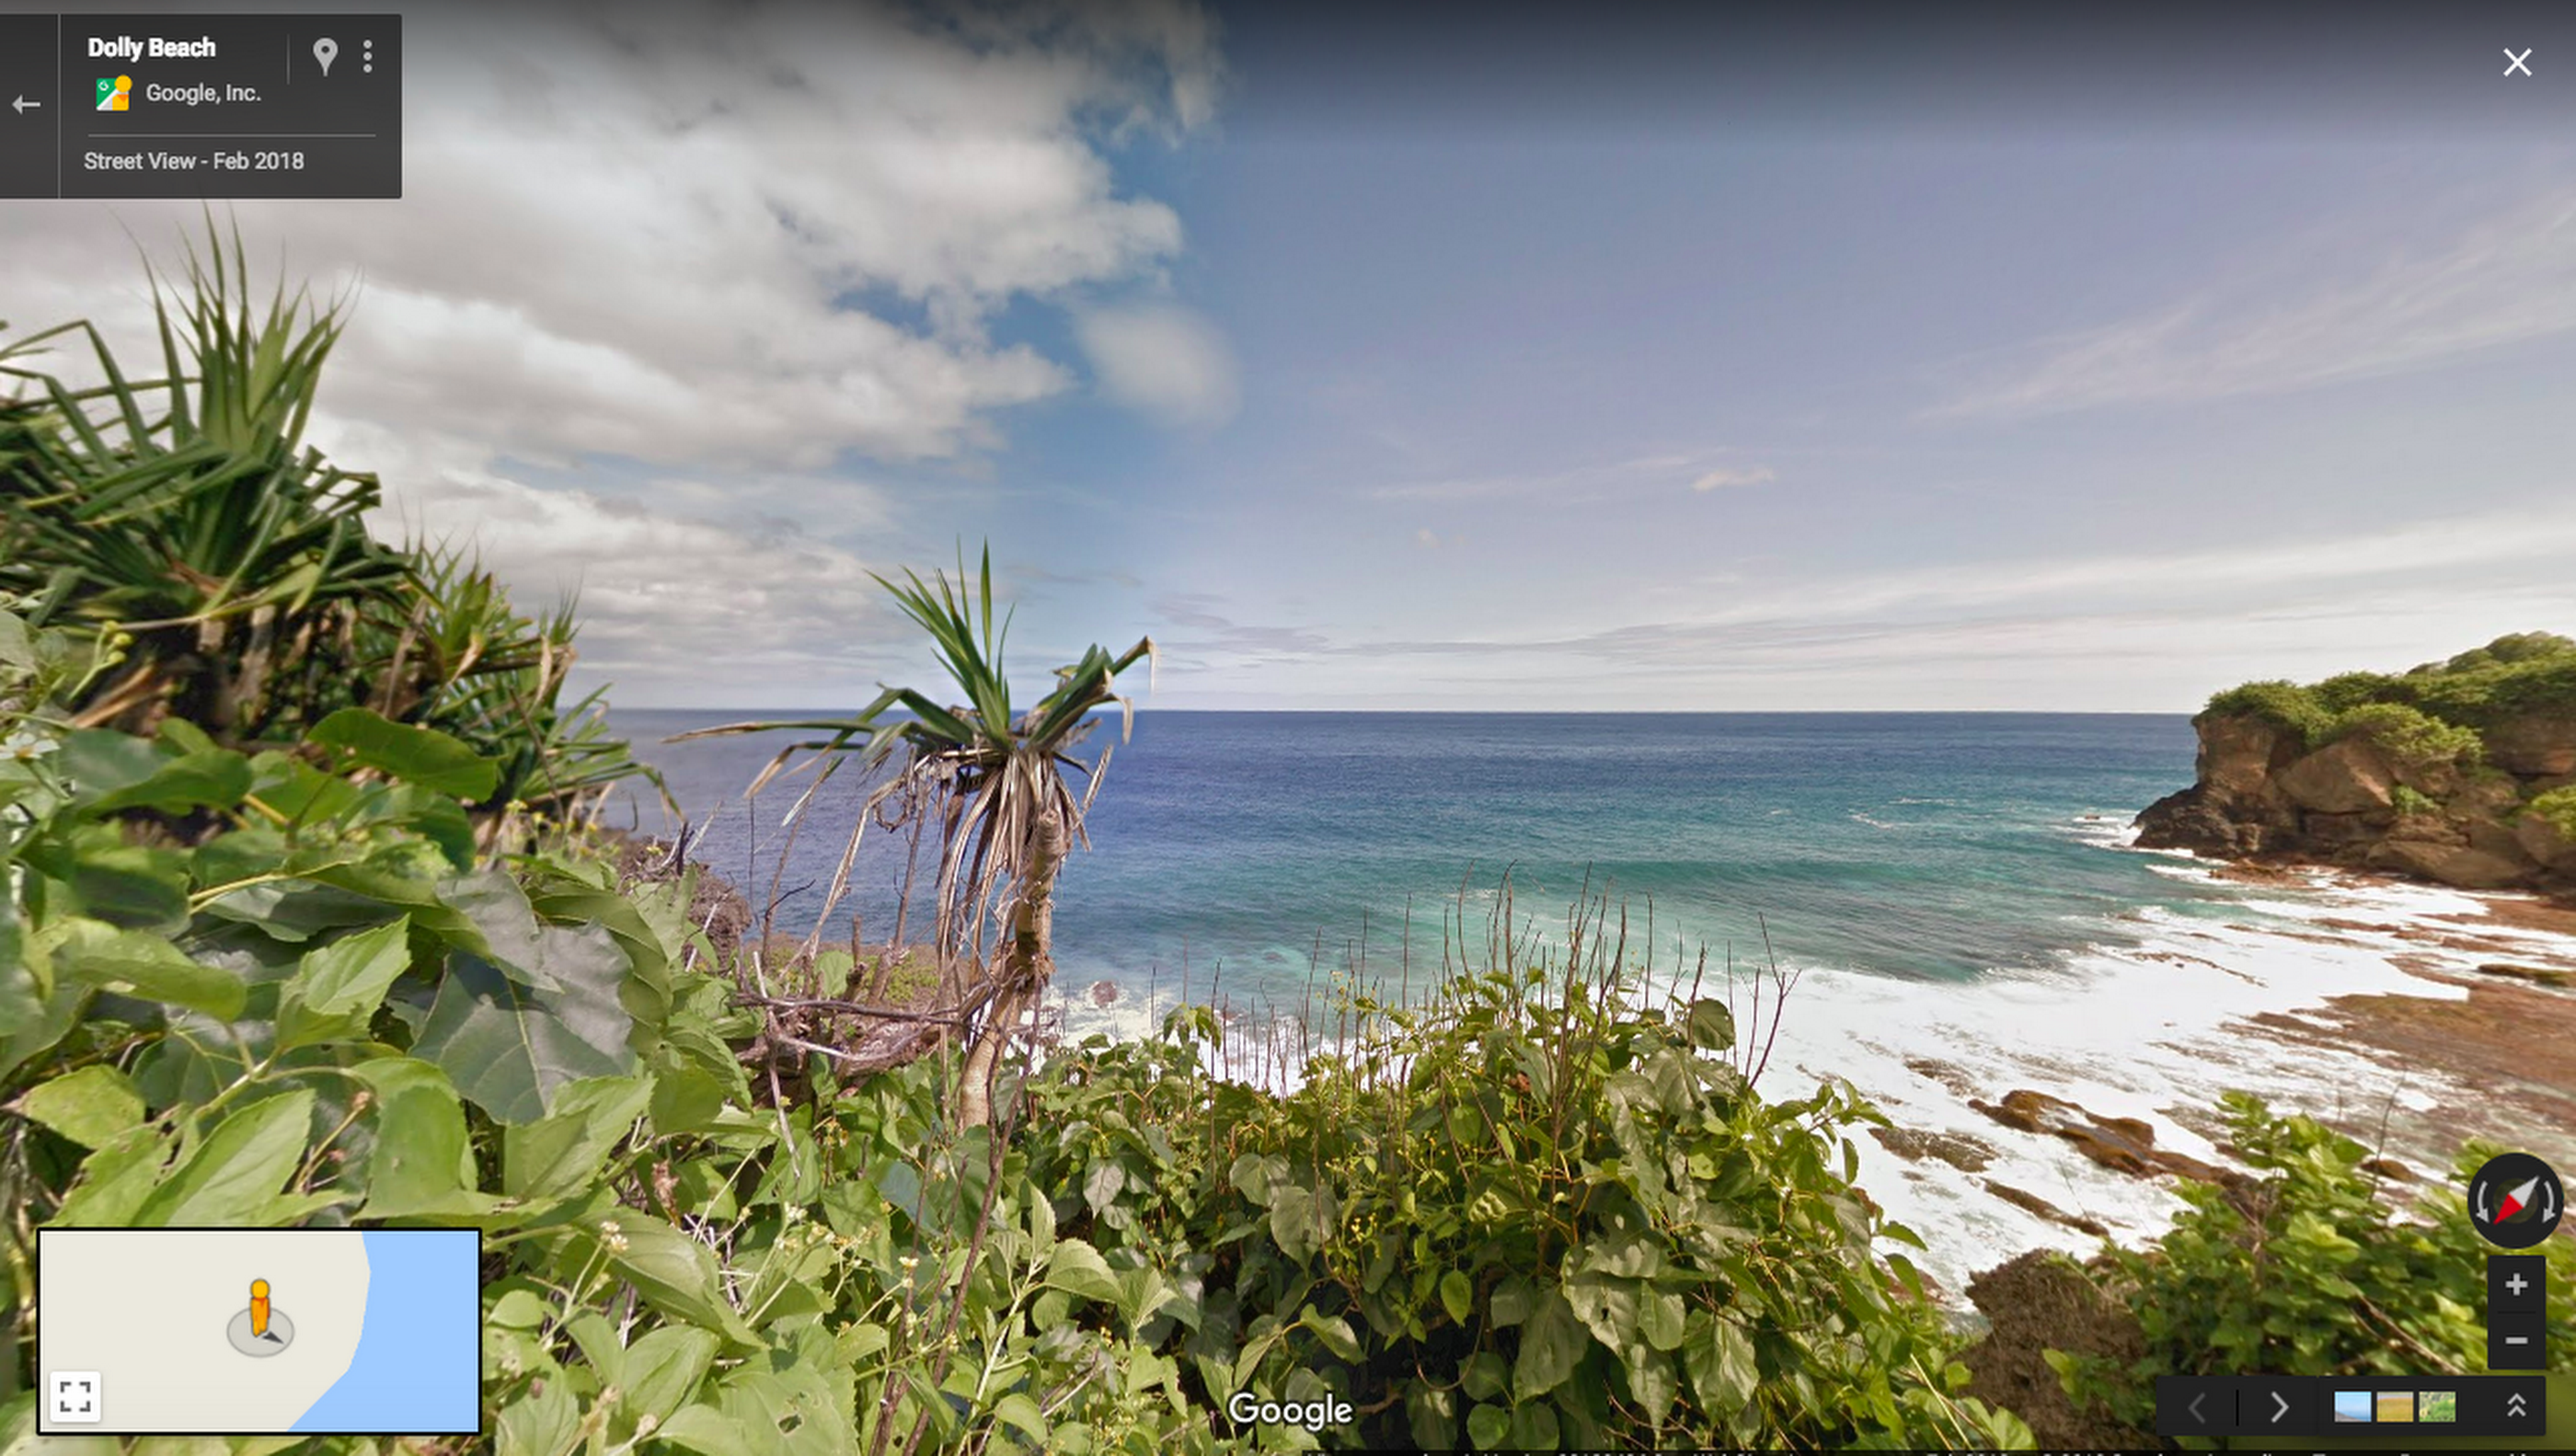 Shellebrating Christmas Island’s extraordinary nature with Street View and Google Earth